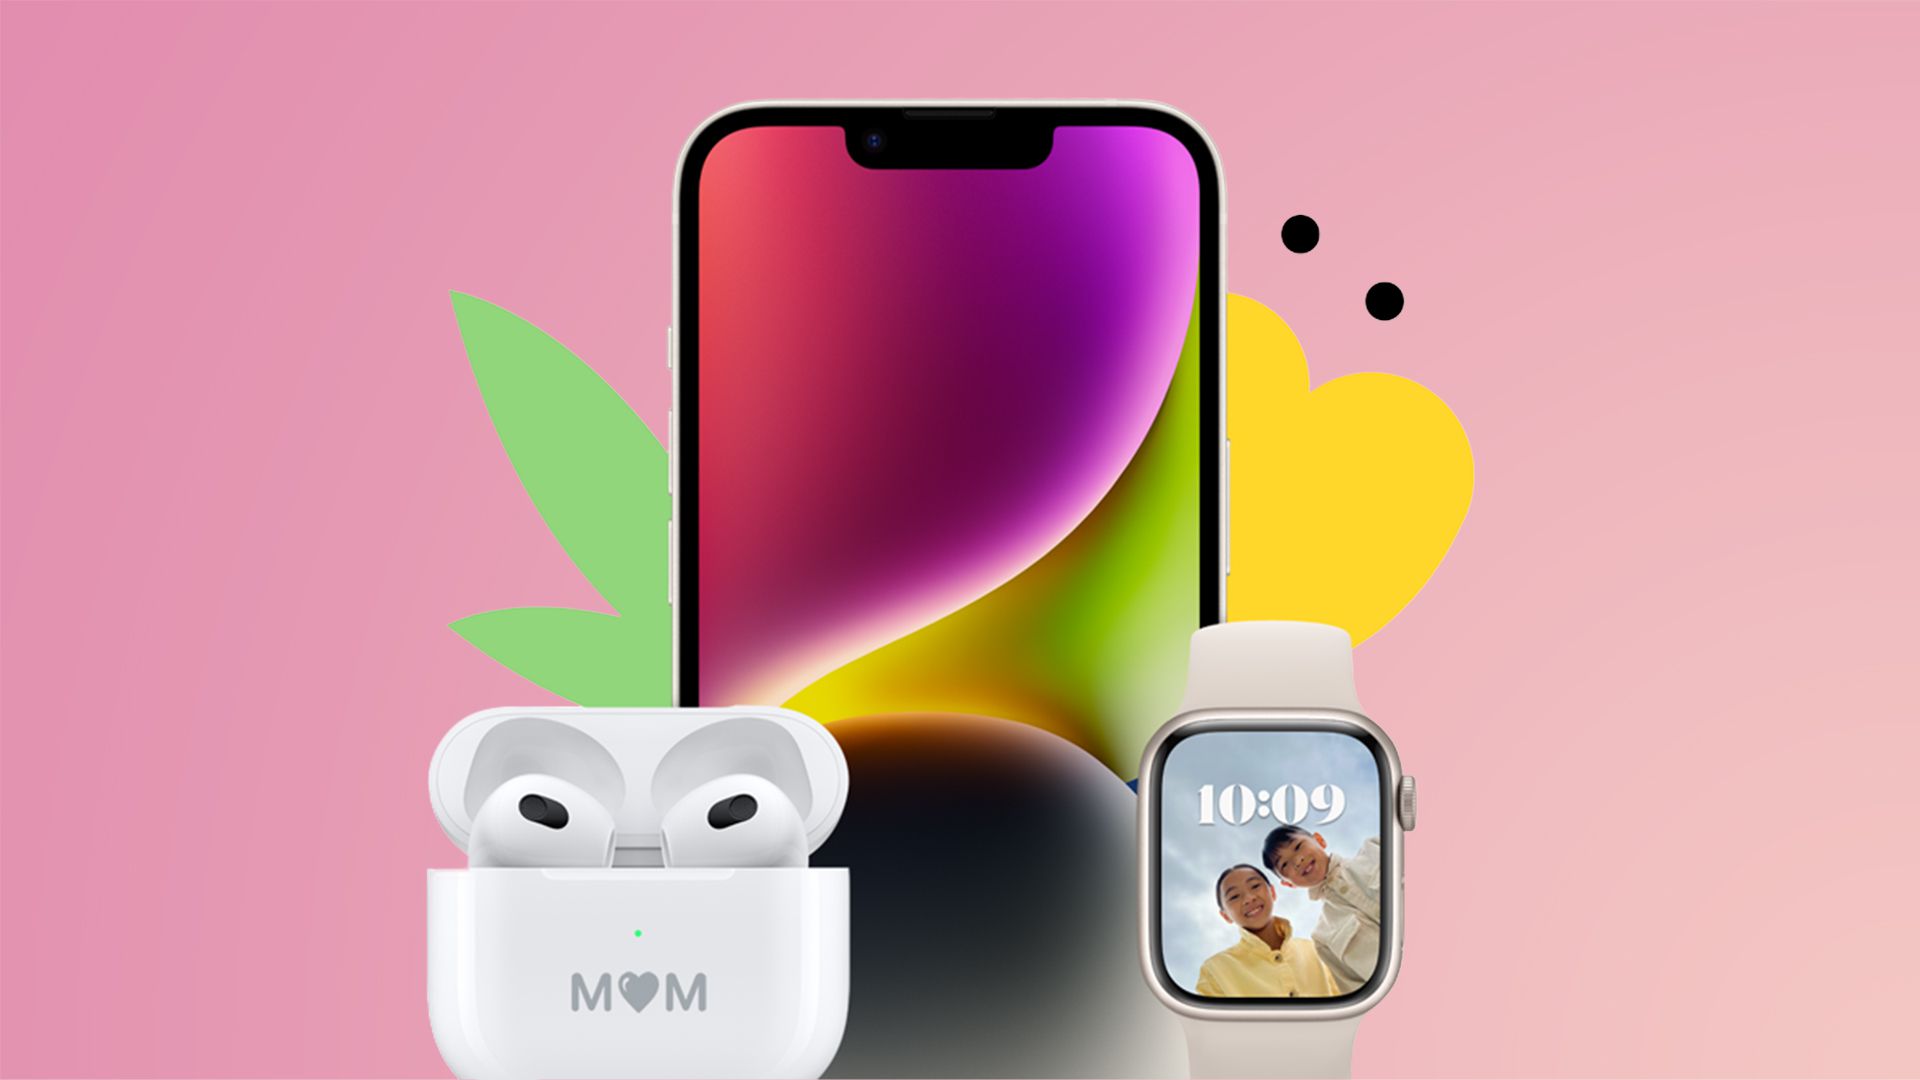 Apple Shares Mother's Day Gift Guide: Here Are 8 Ideas Under $100 - macrumors.com